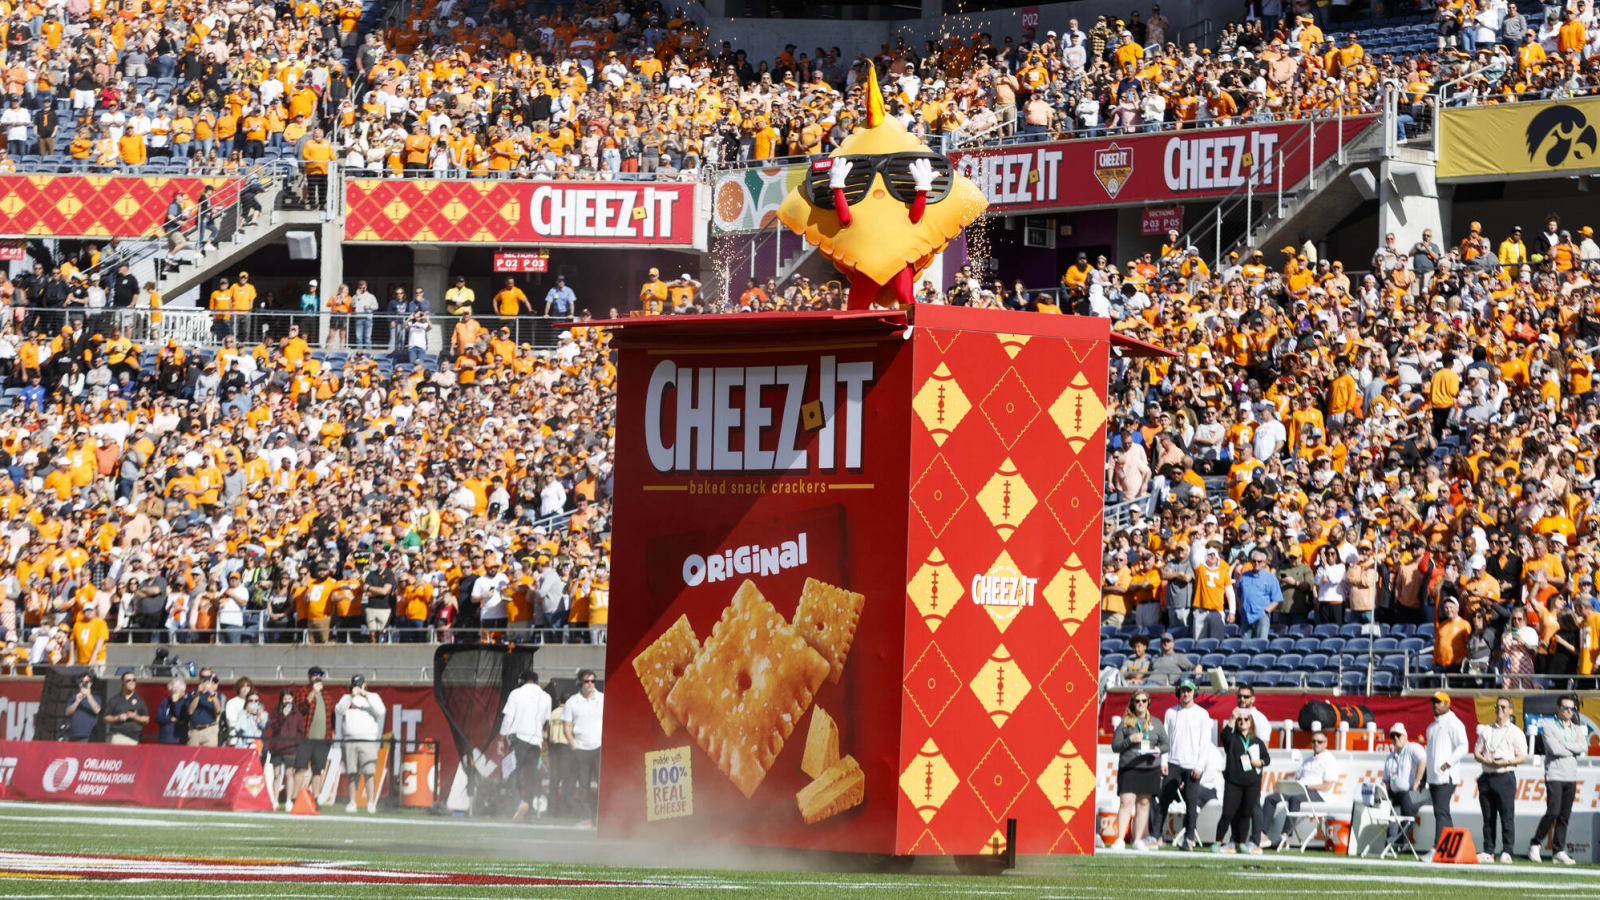 Watch: Late strawberry Pop-Tart has competition for wildest mascot entrance of bowl season